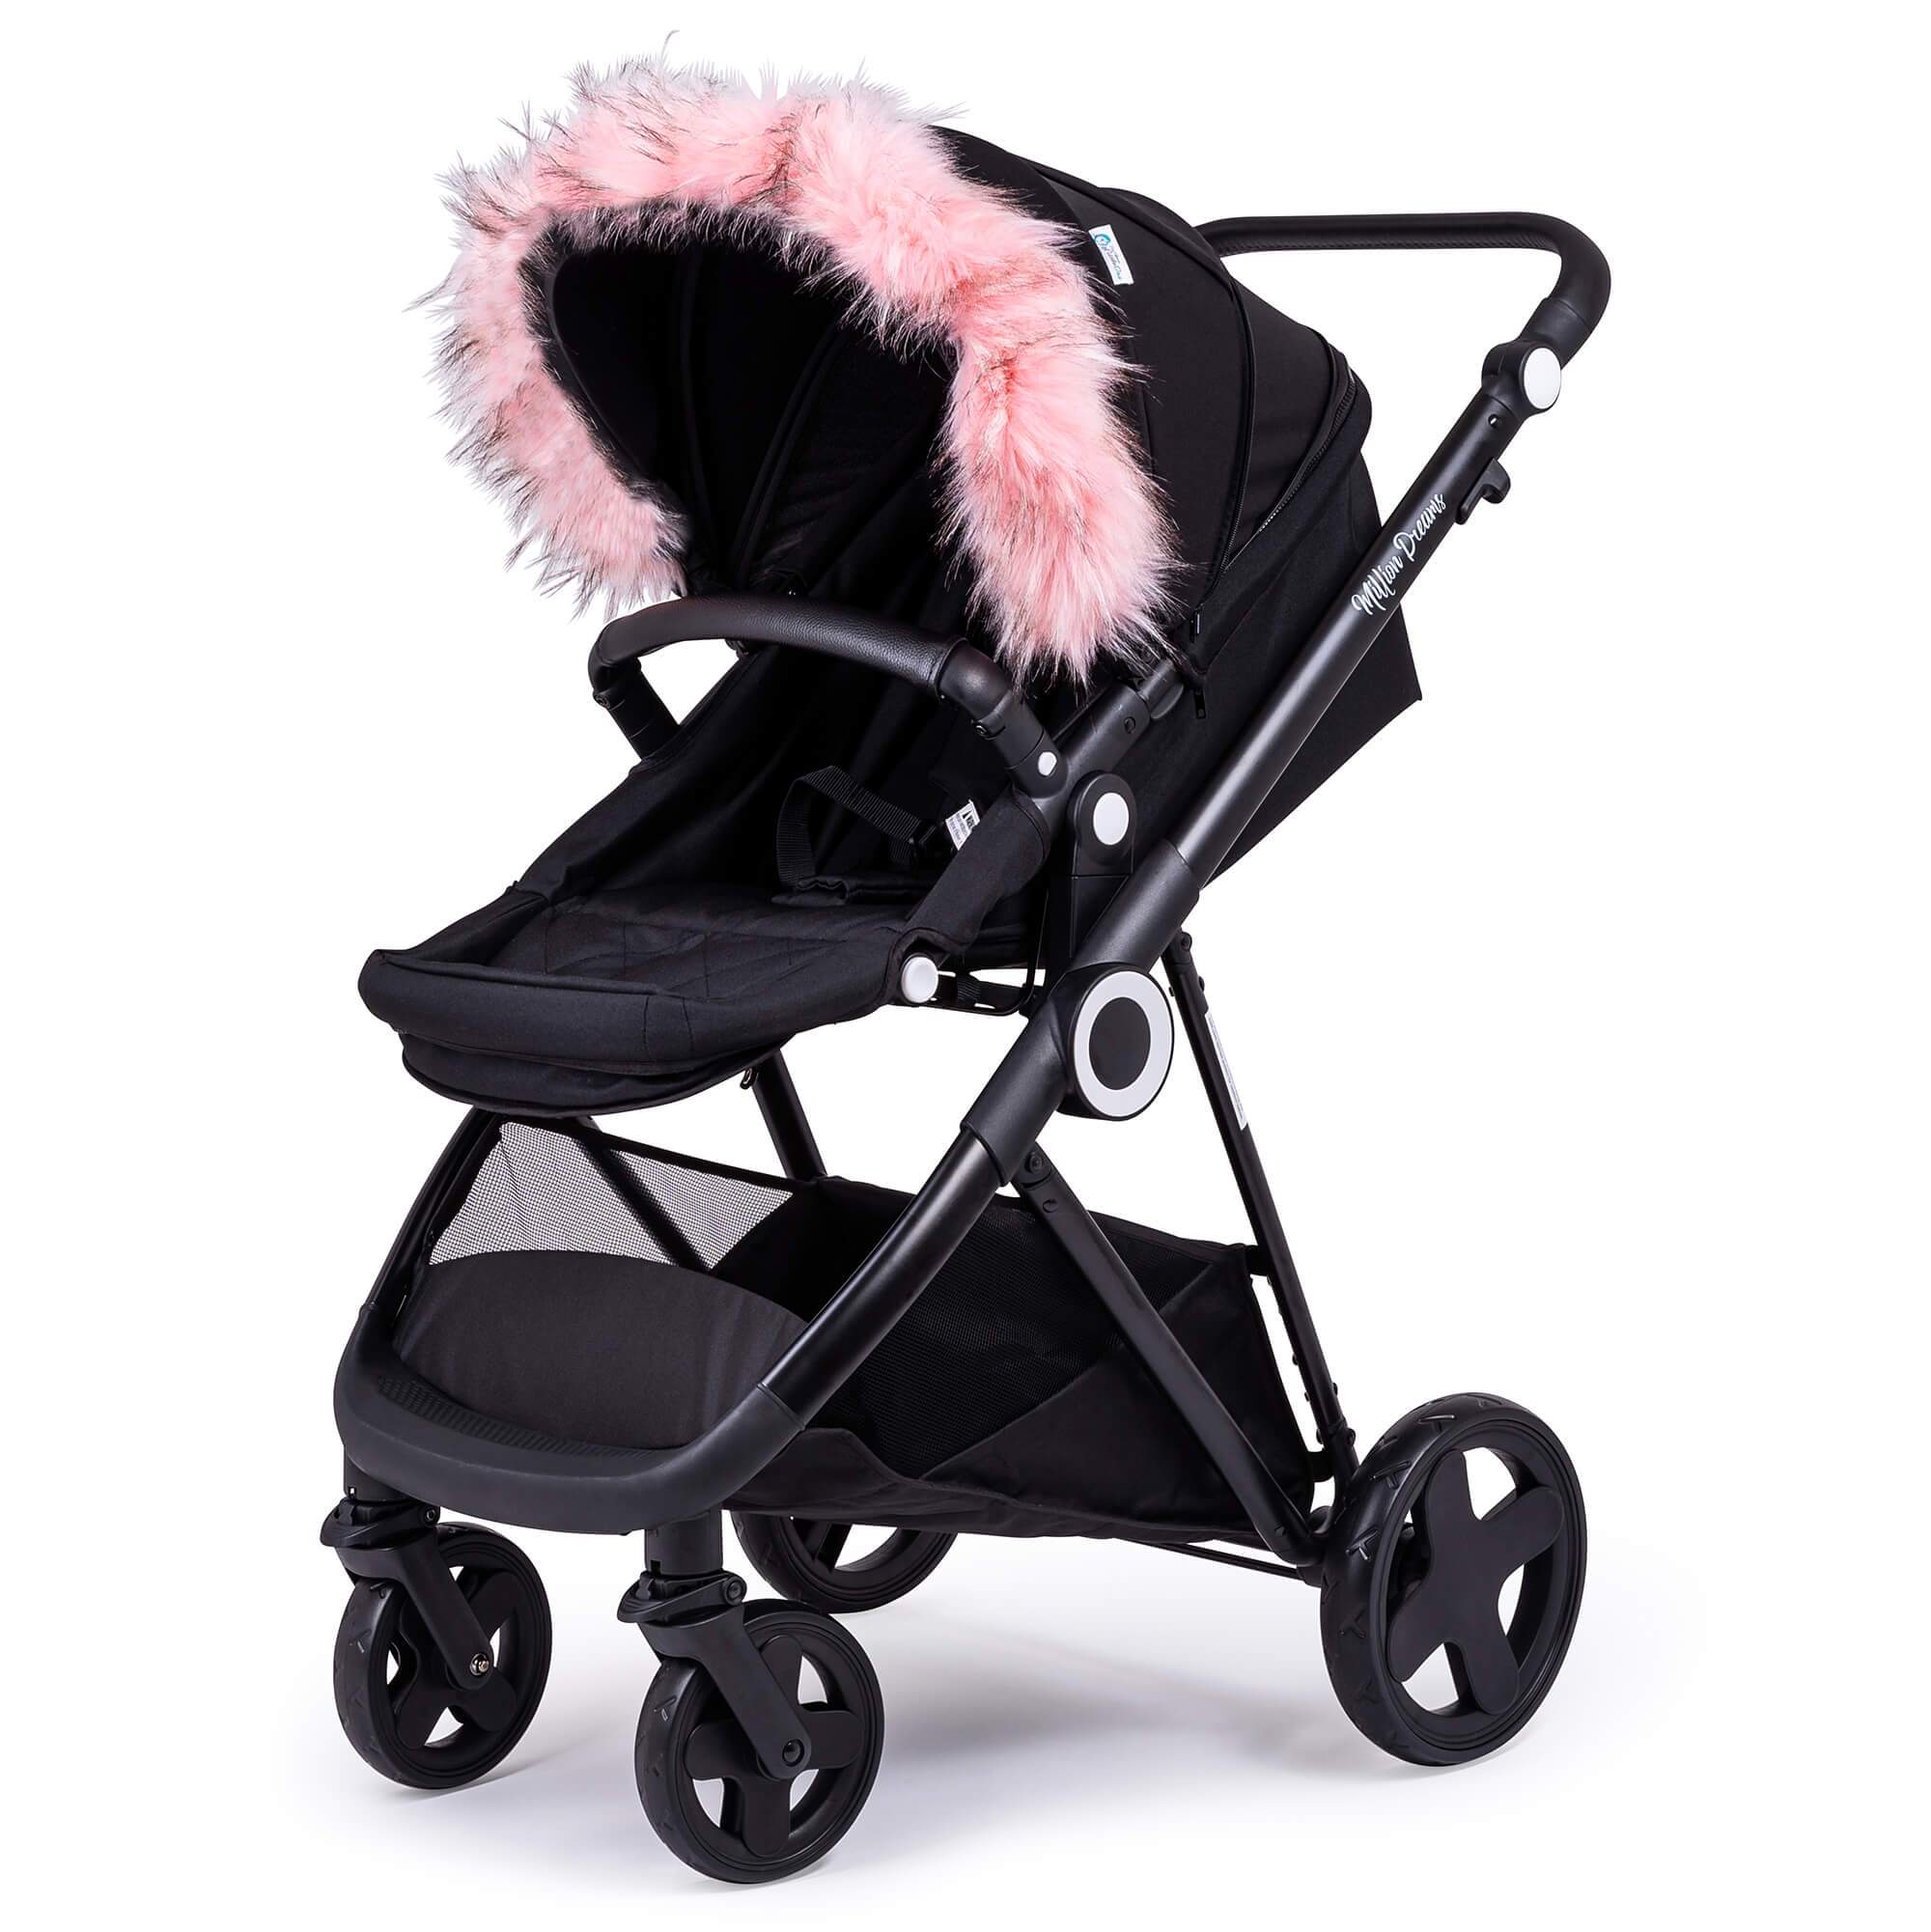 Pram Fur Hood Trim Attachment for Pushchair Compatible with Bebe Confort - Light Pink / Fits All Models | For Your Little One